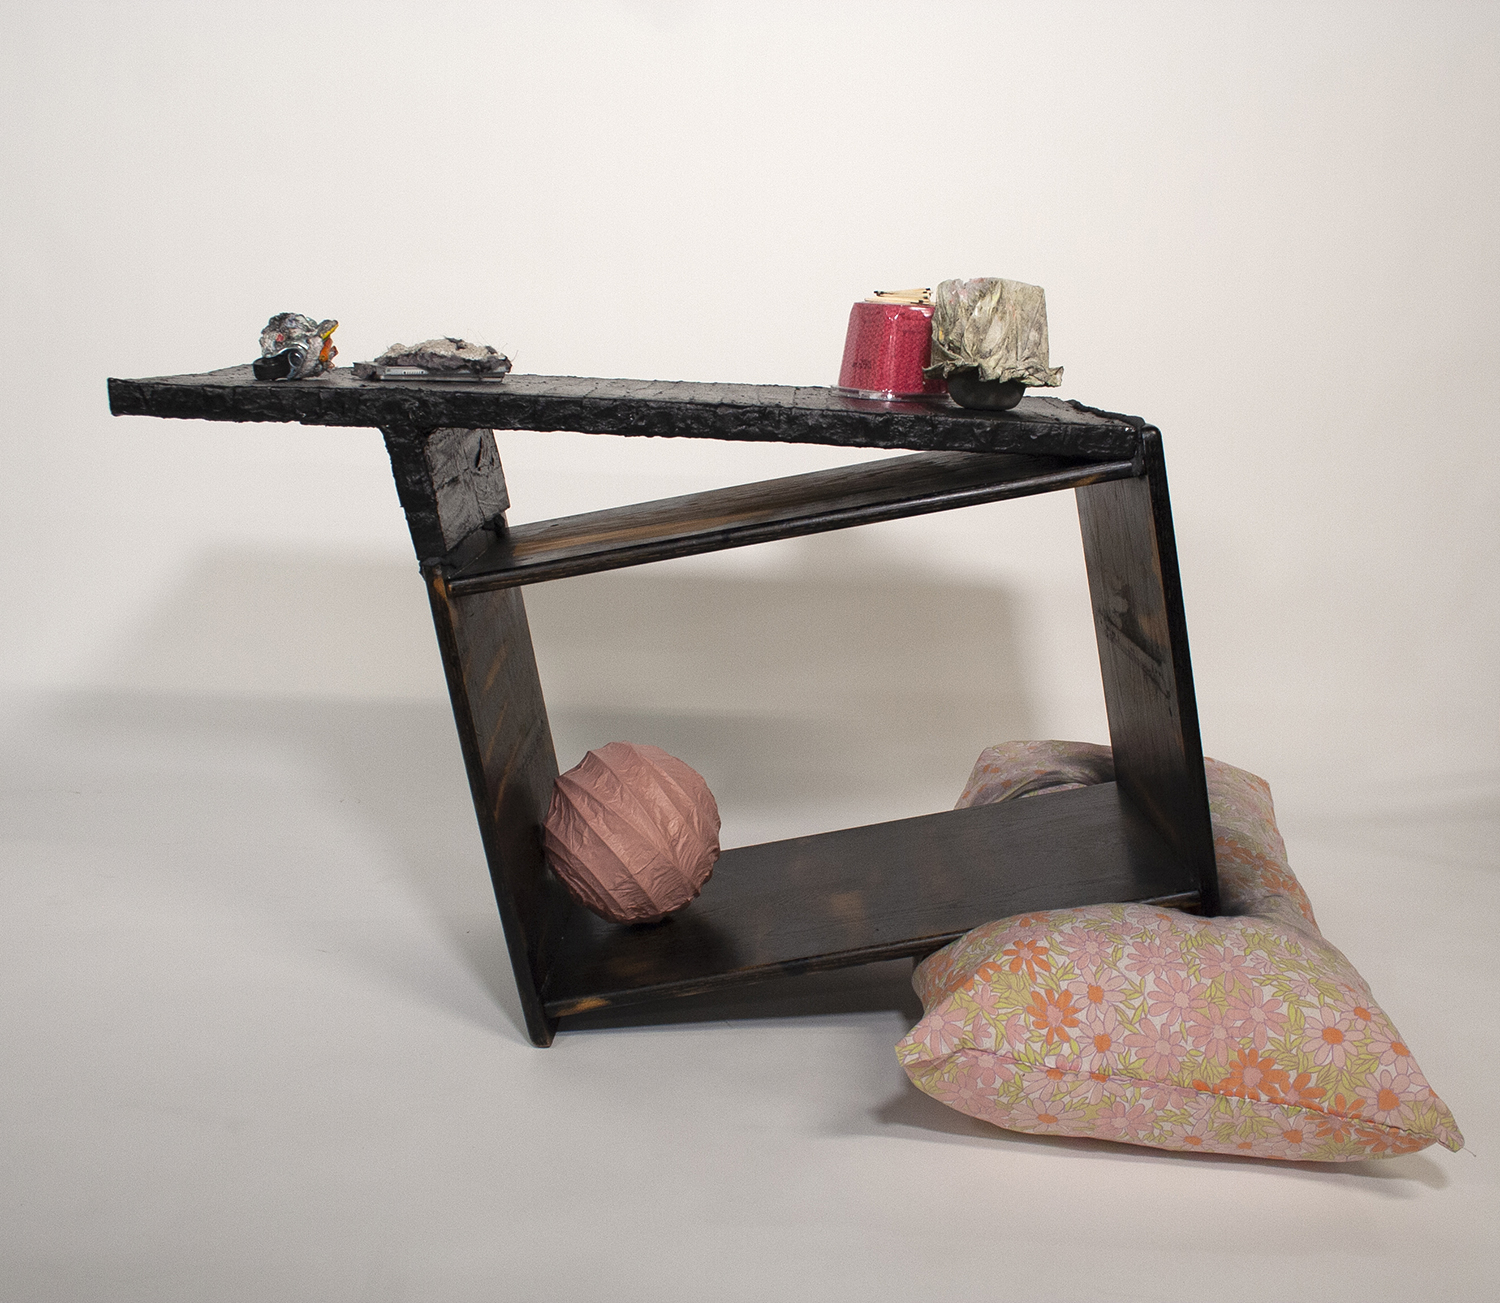 MFA students showcasing projects in a variety of mediums